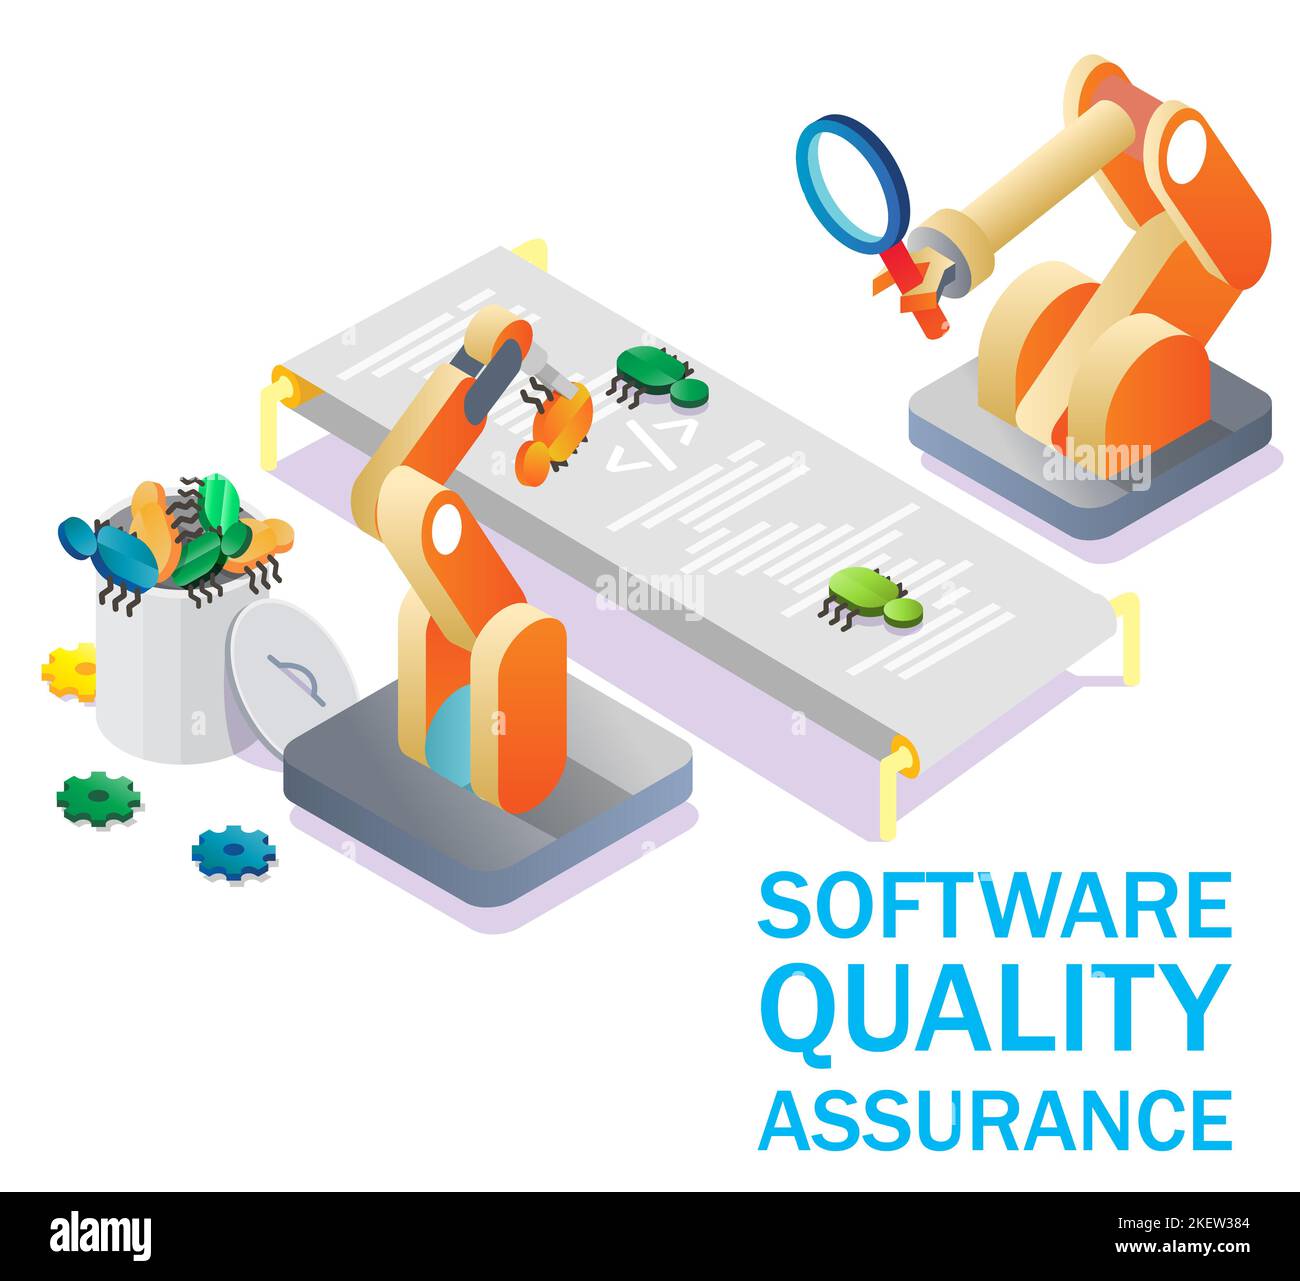 Software quality assurance, vector isometric illustration. SQA, automated code testing, debugging concept for web banner, website page etc. Stock Vector